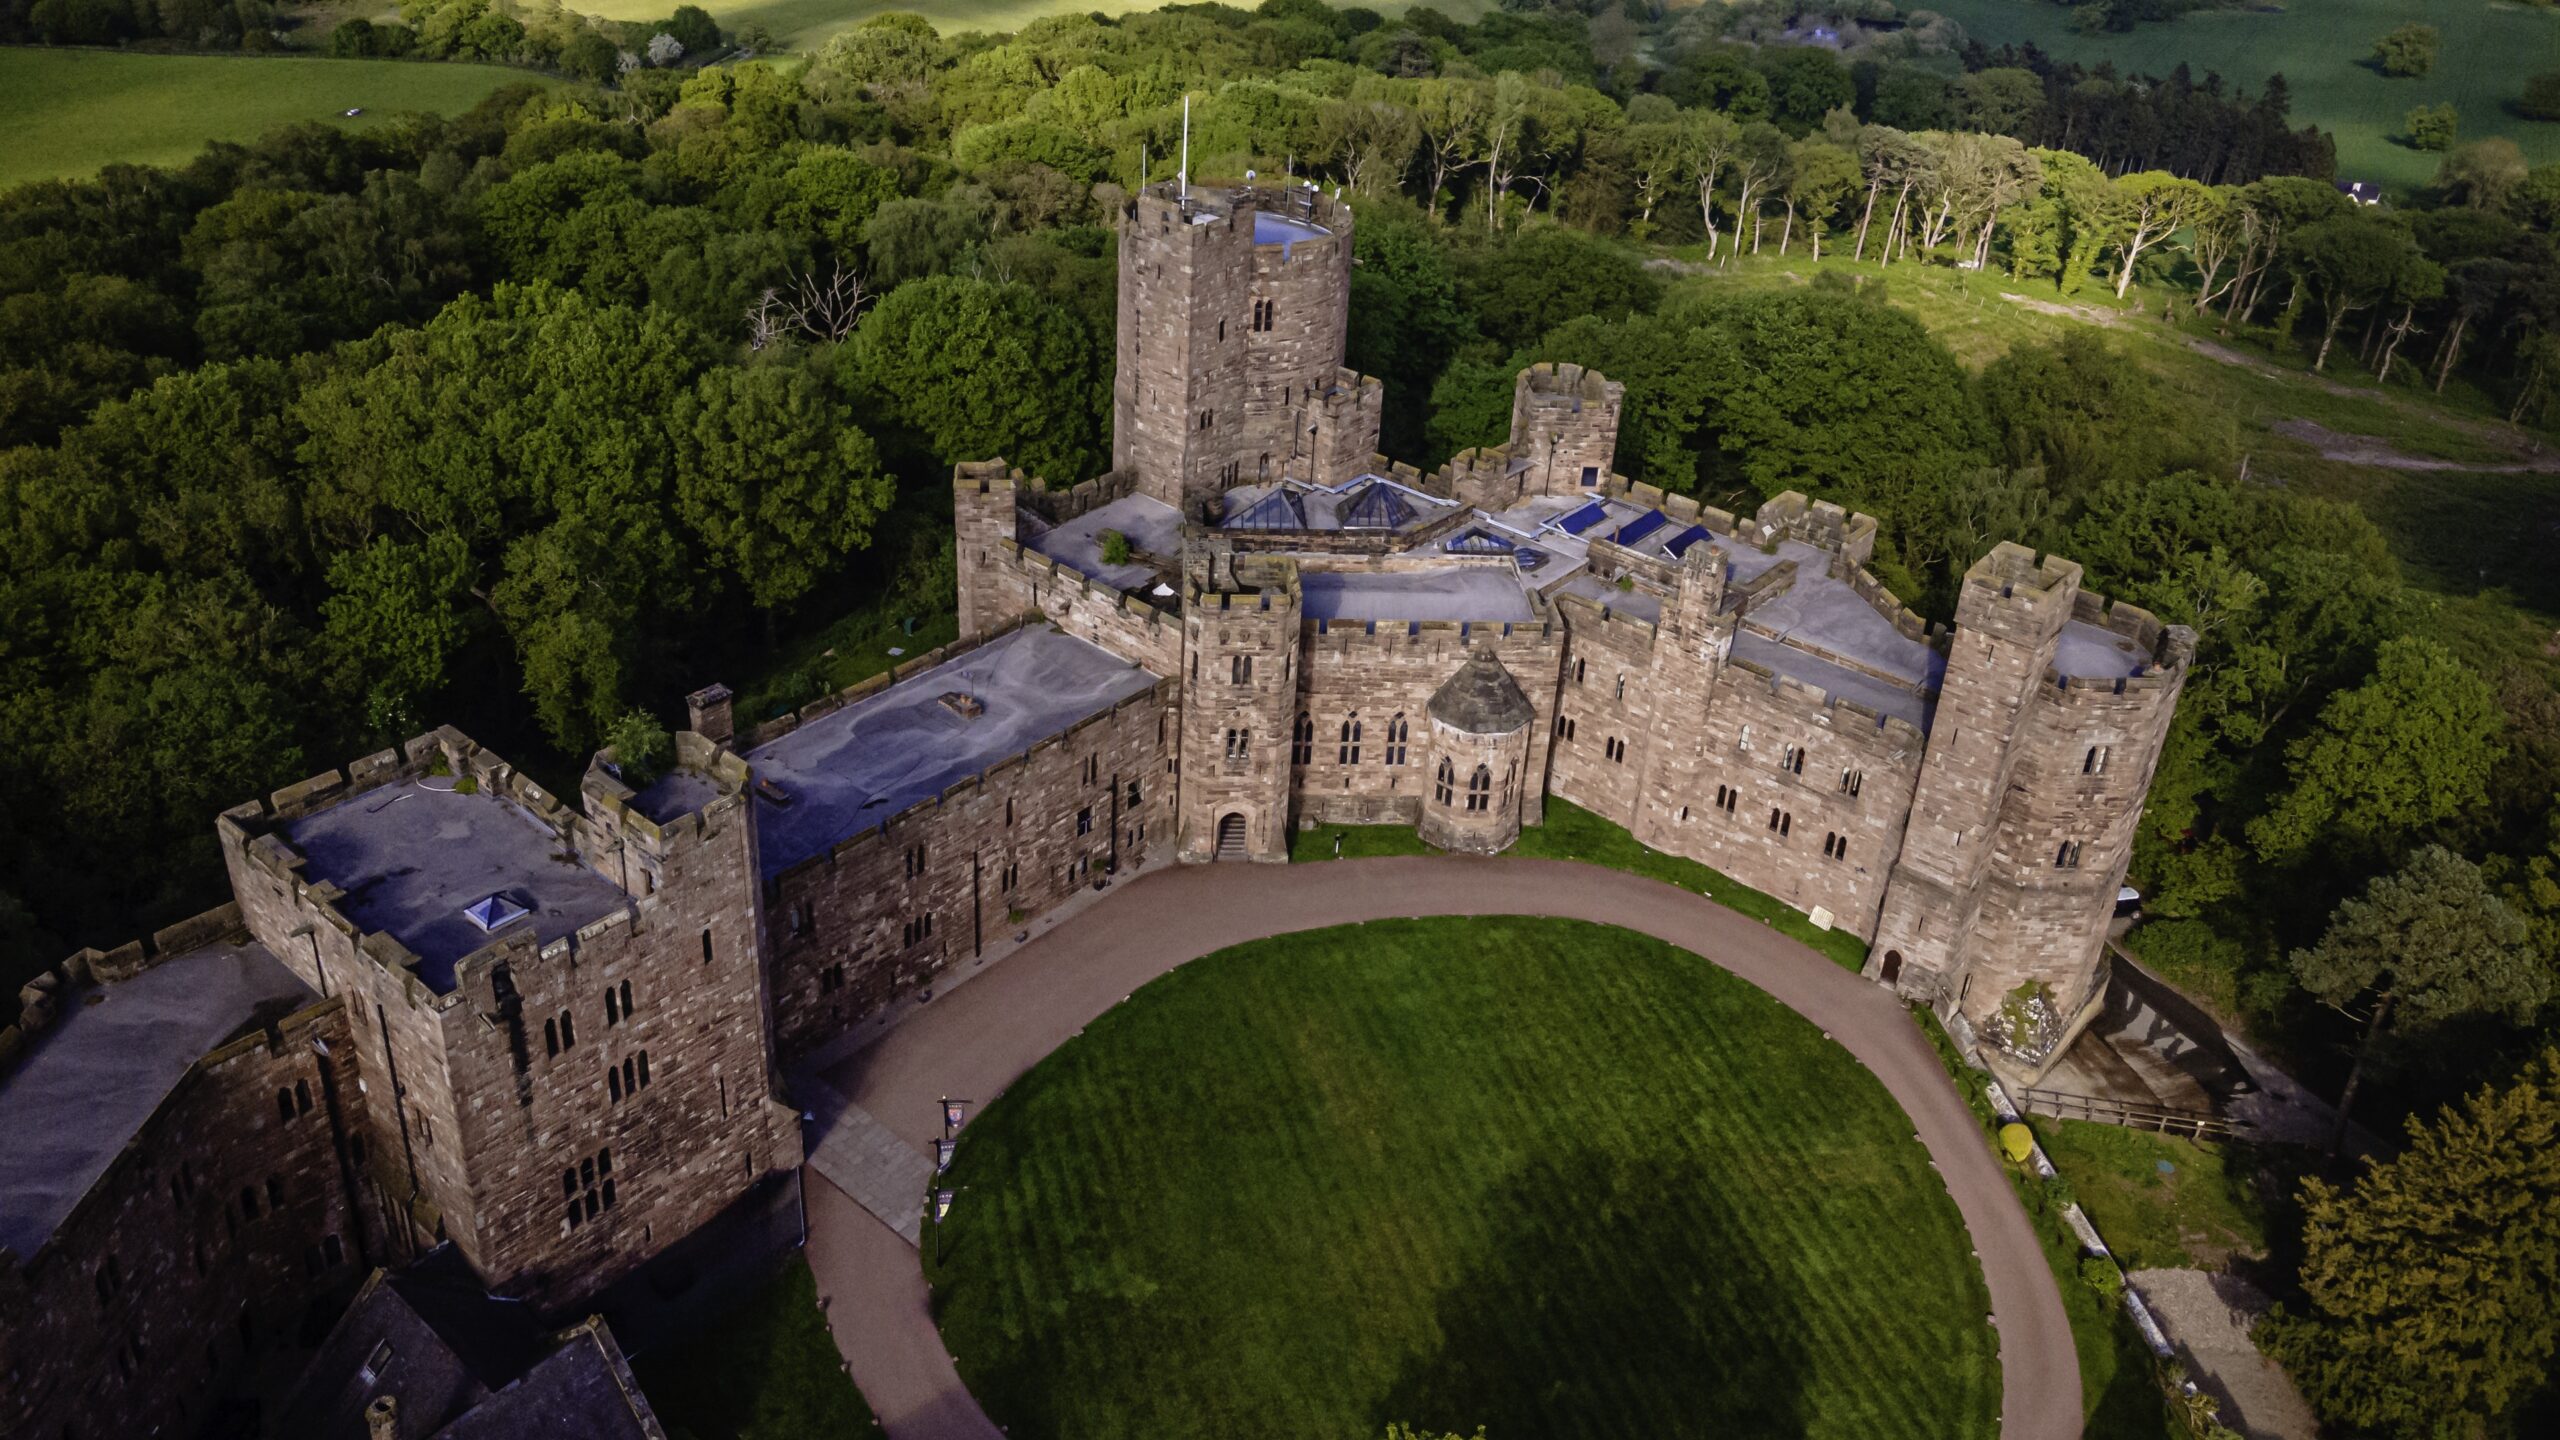 Aerial view of historic medieval Peckforton castle at dusk.